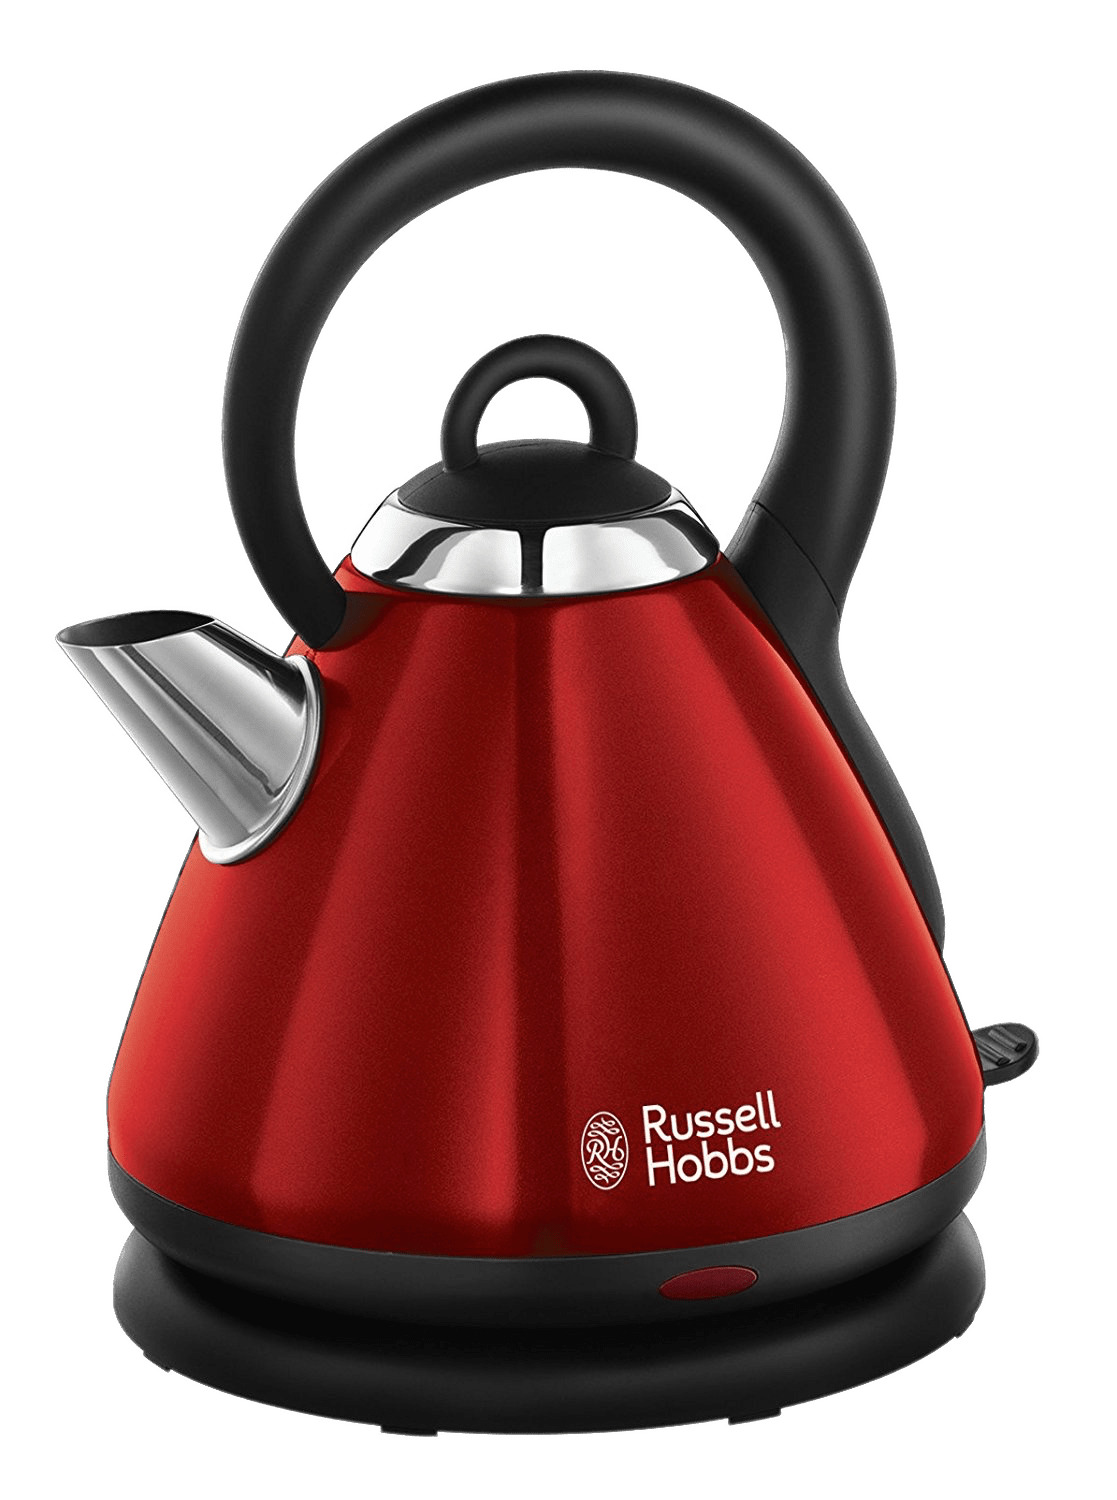 Russel Hobbs Red Kettle icons